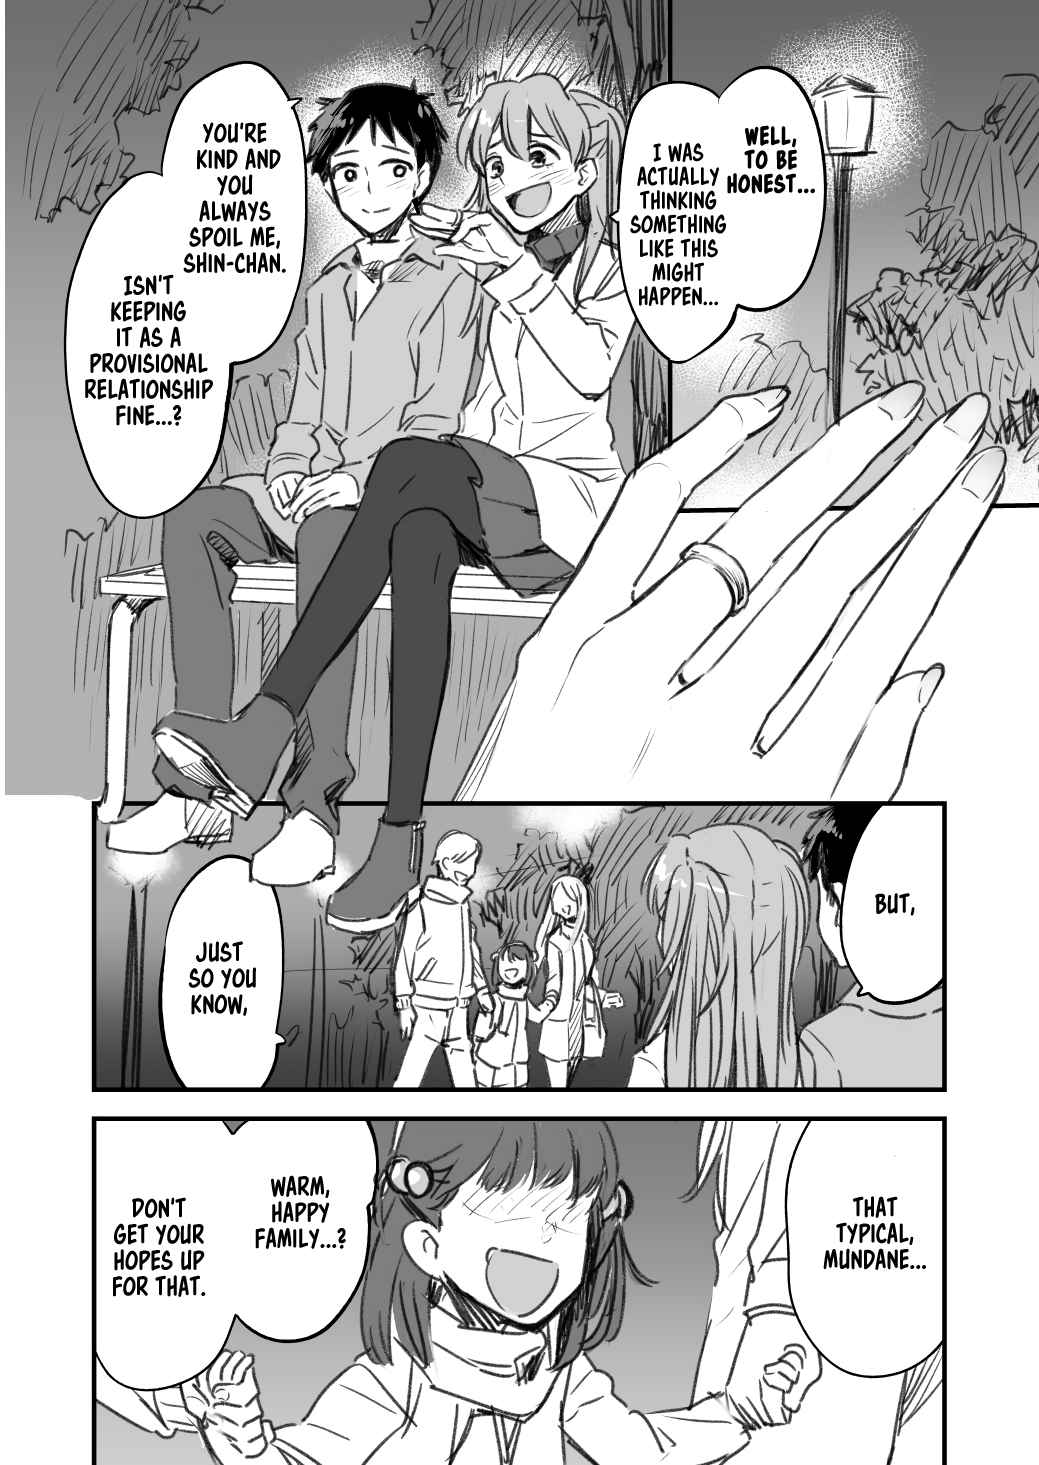 Neon Genesis Evangelion A lovey dovey fanfic about Evangelion's Asuka and a slightly grown up Shinji kun (Doujinshi) Oneshot